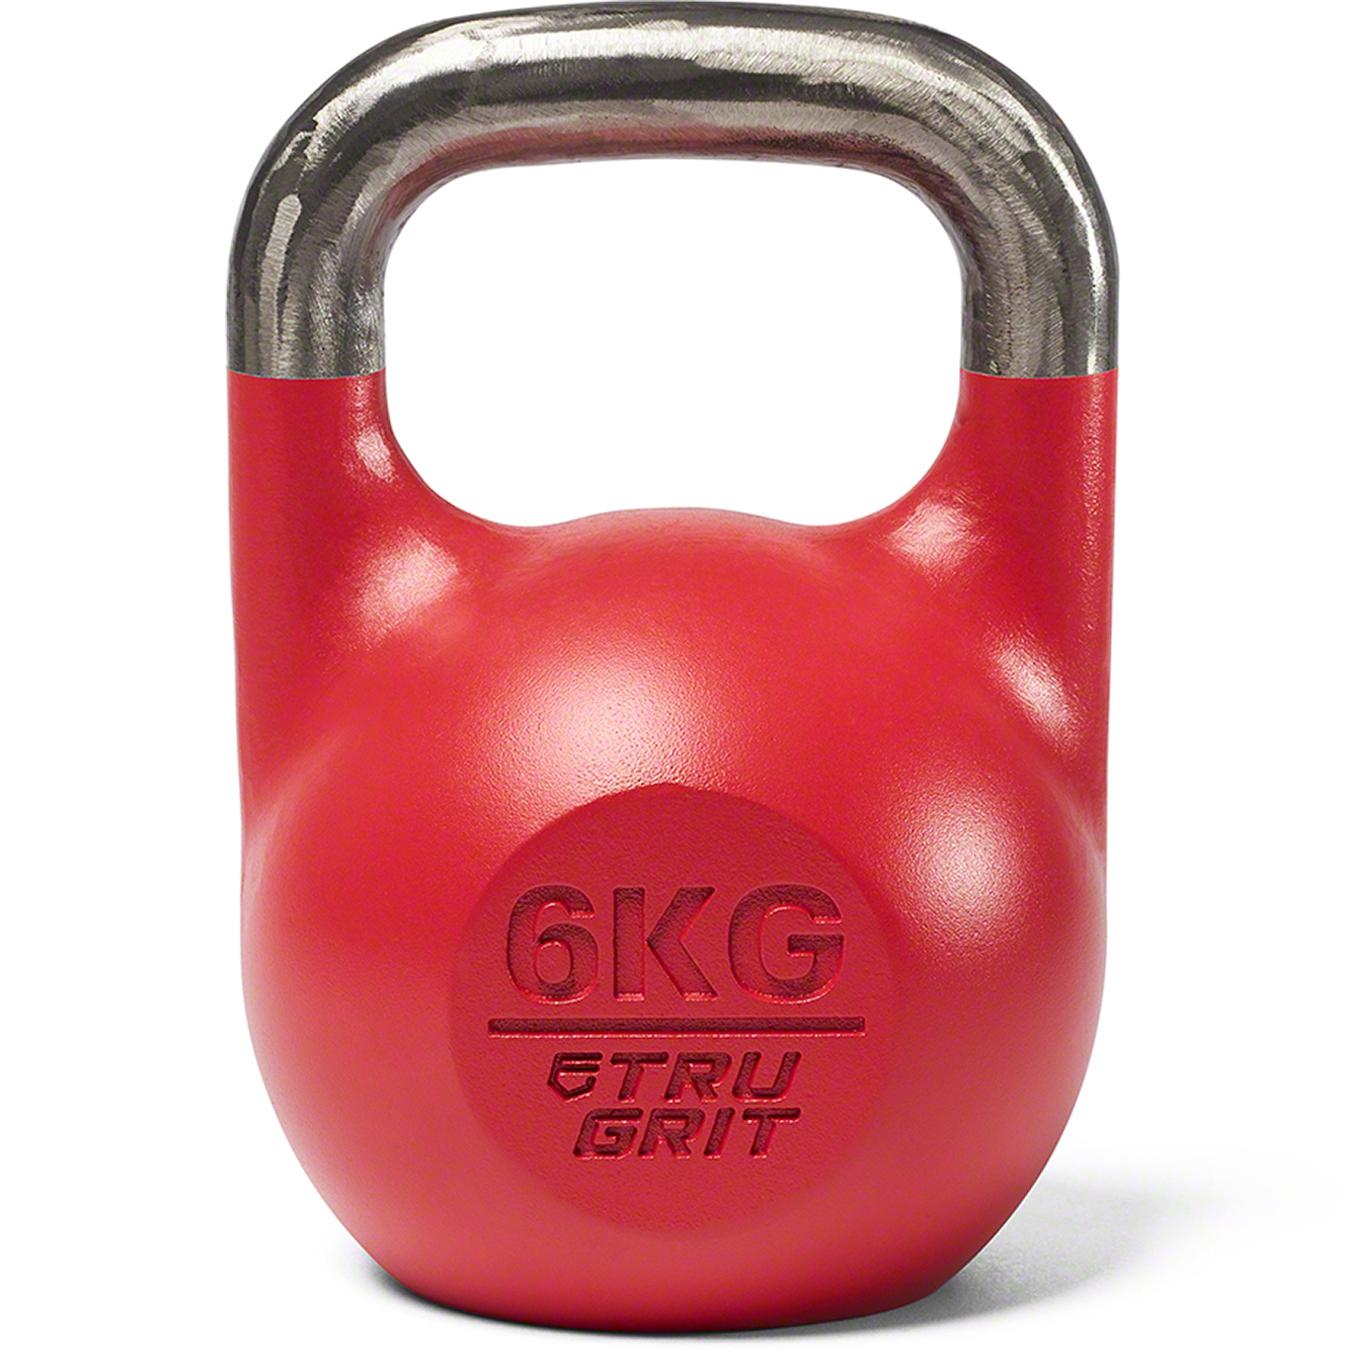 Supreme fall 2022 red Kettlebell six kilogram weight, New in Box.